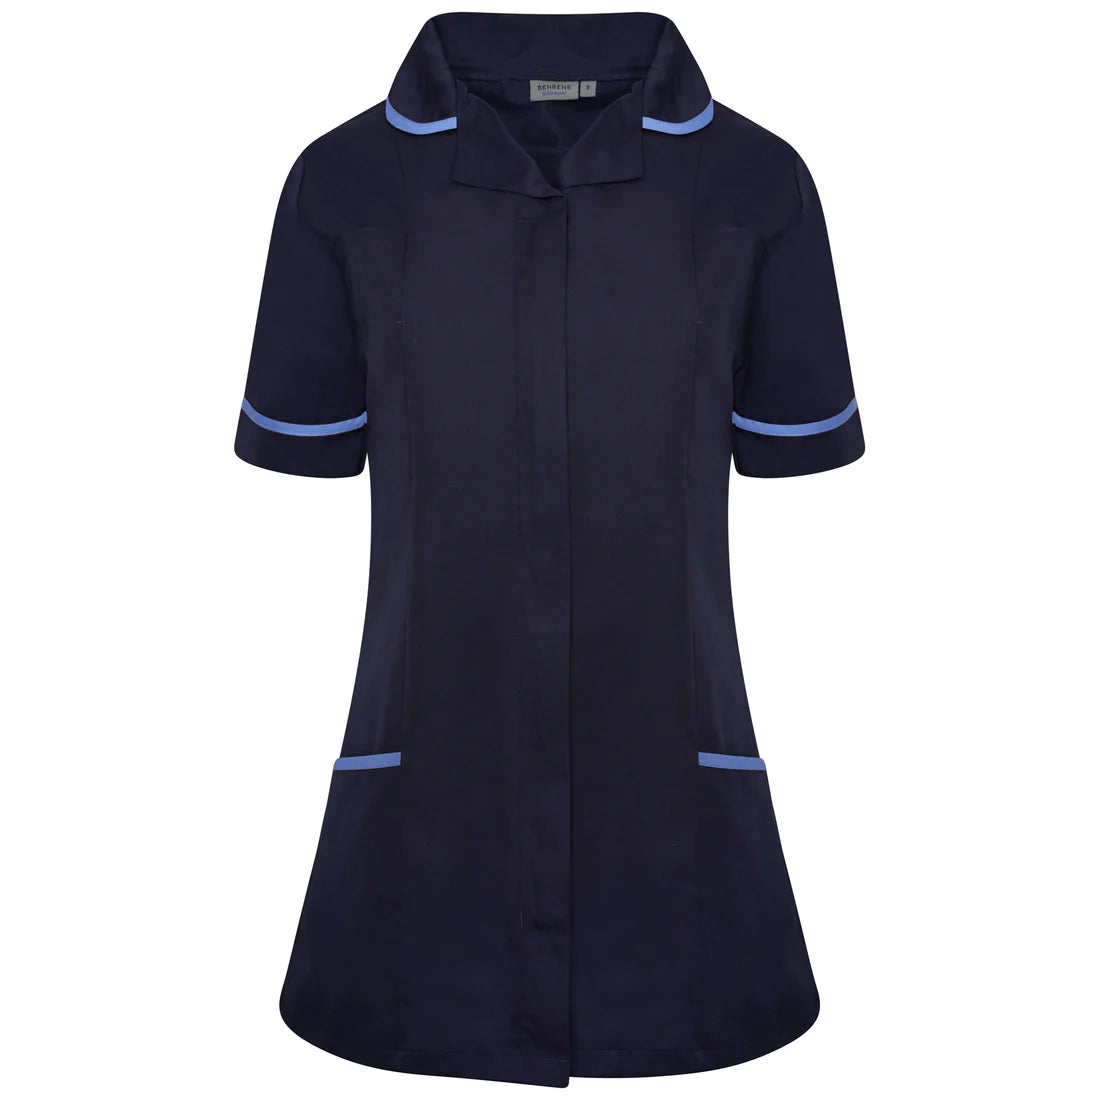 Navy/Hospital Blue Contrast Ladies Tunic with Round Collar - NCLTPS